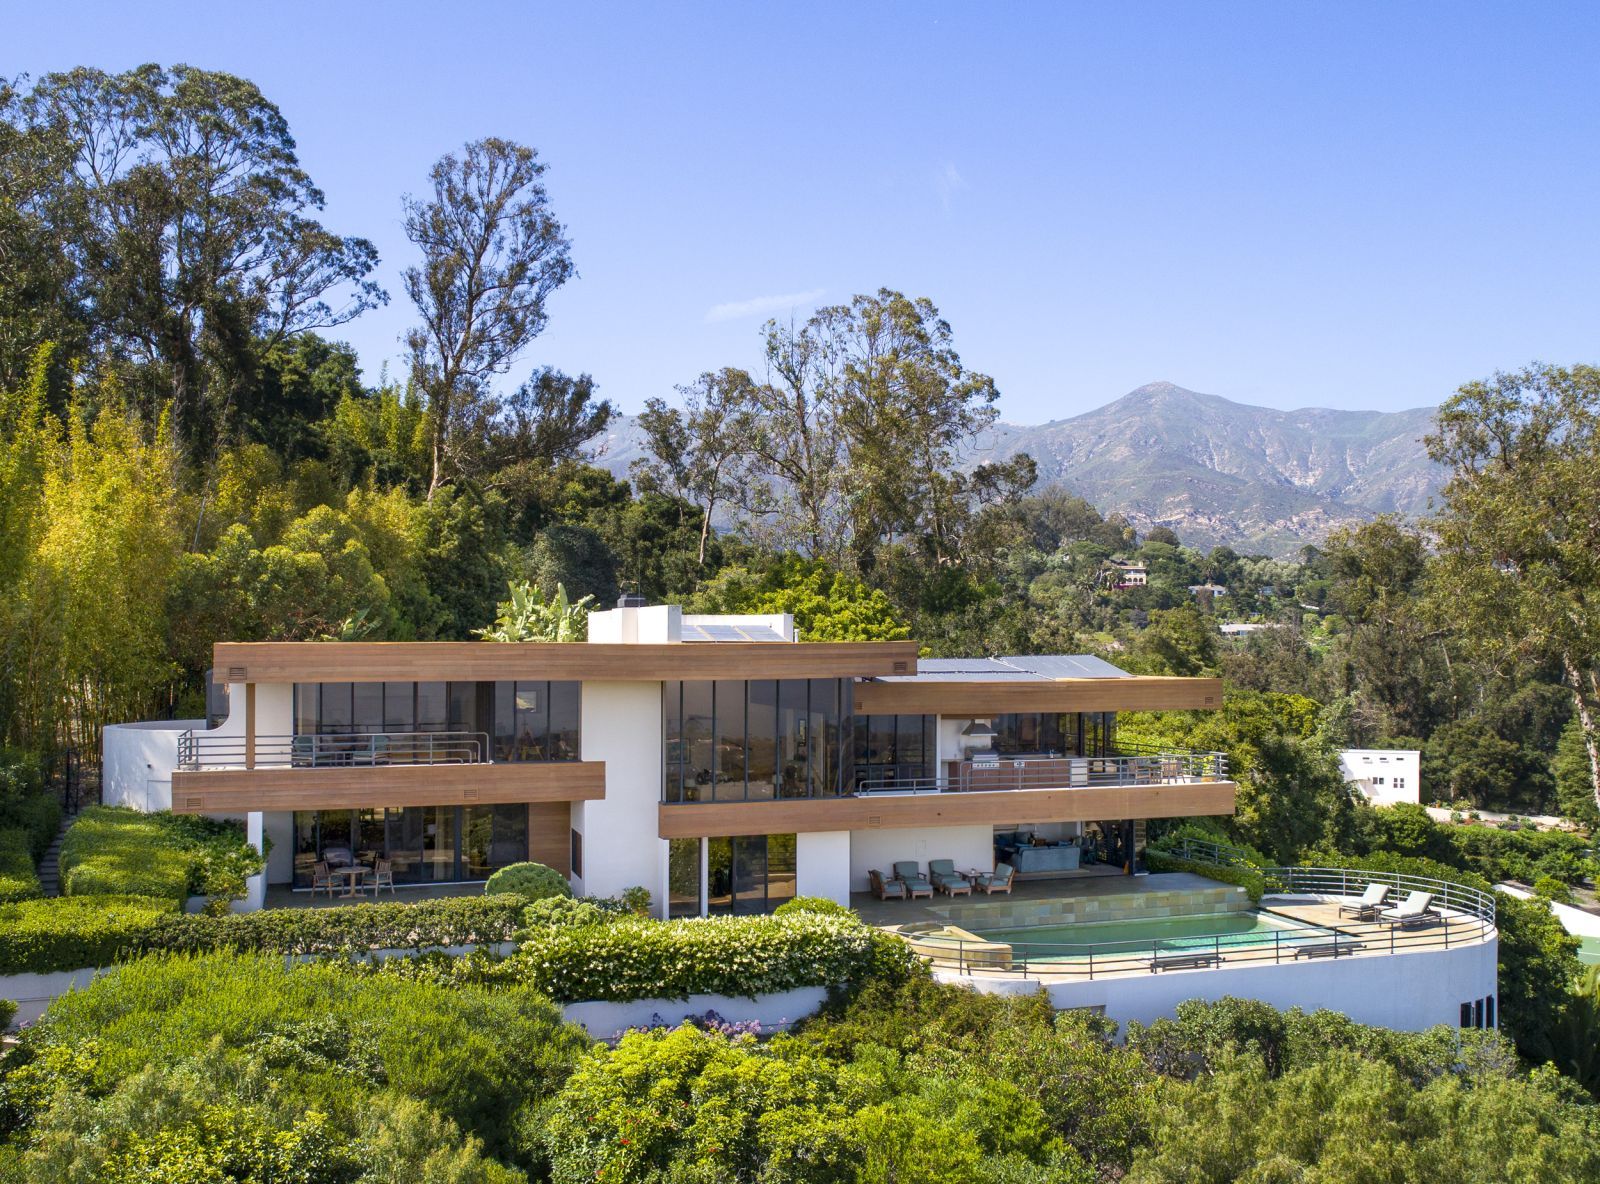 A two-story contemporary home with a pool and lush landscaping in the foreground and mountains in the background.